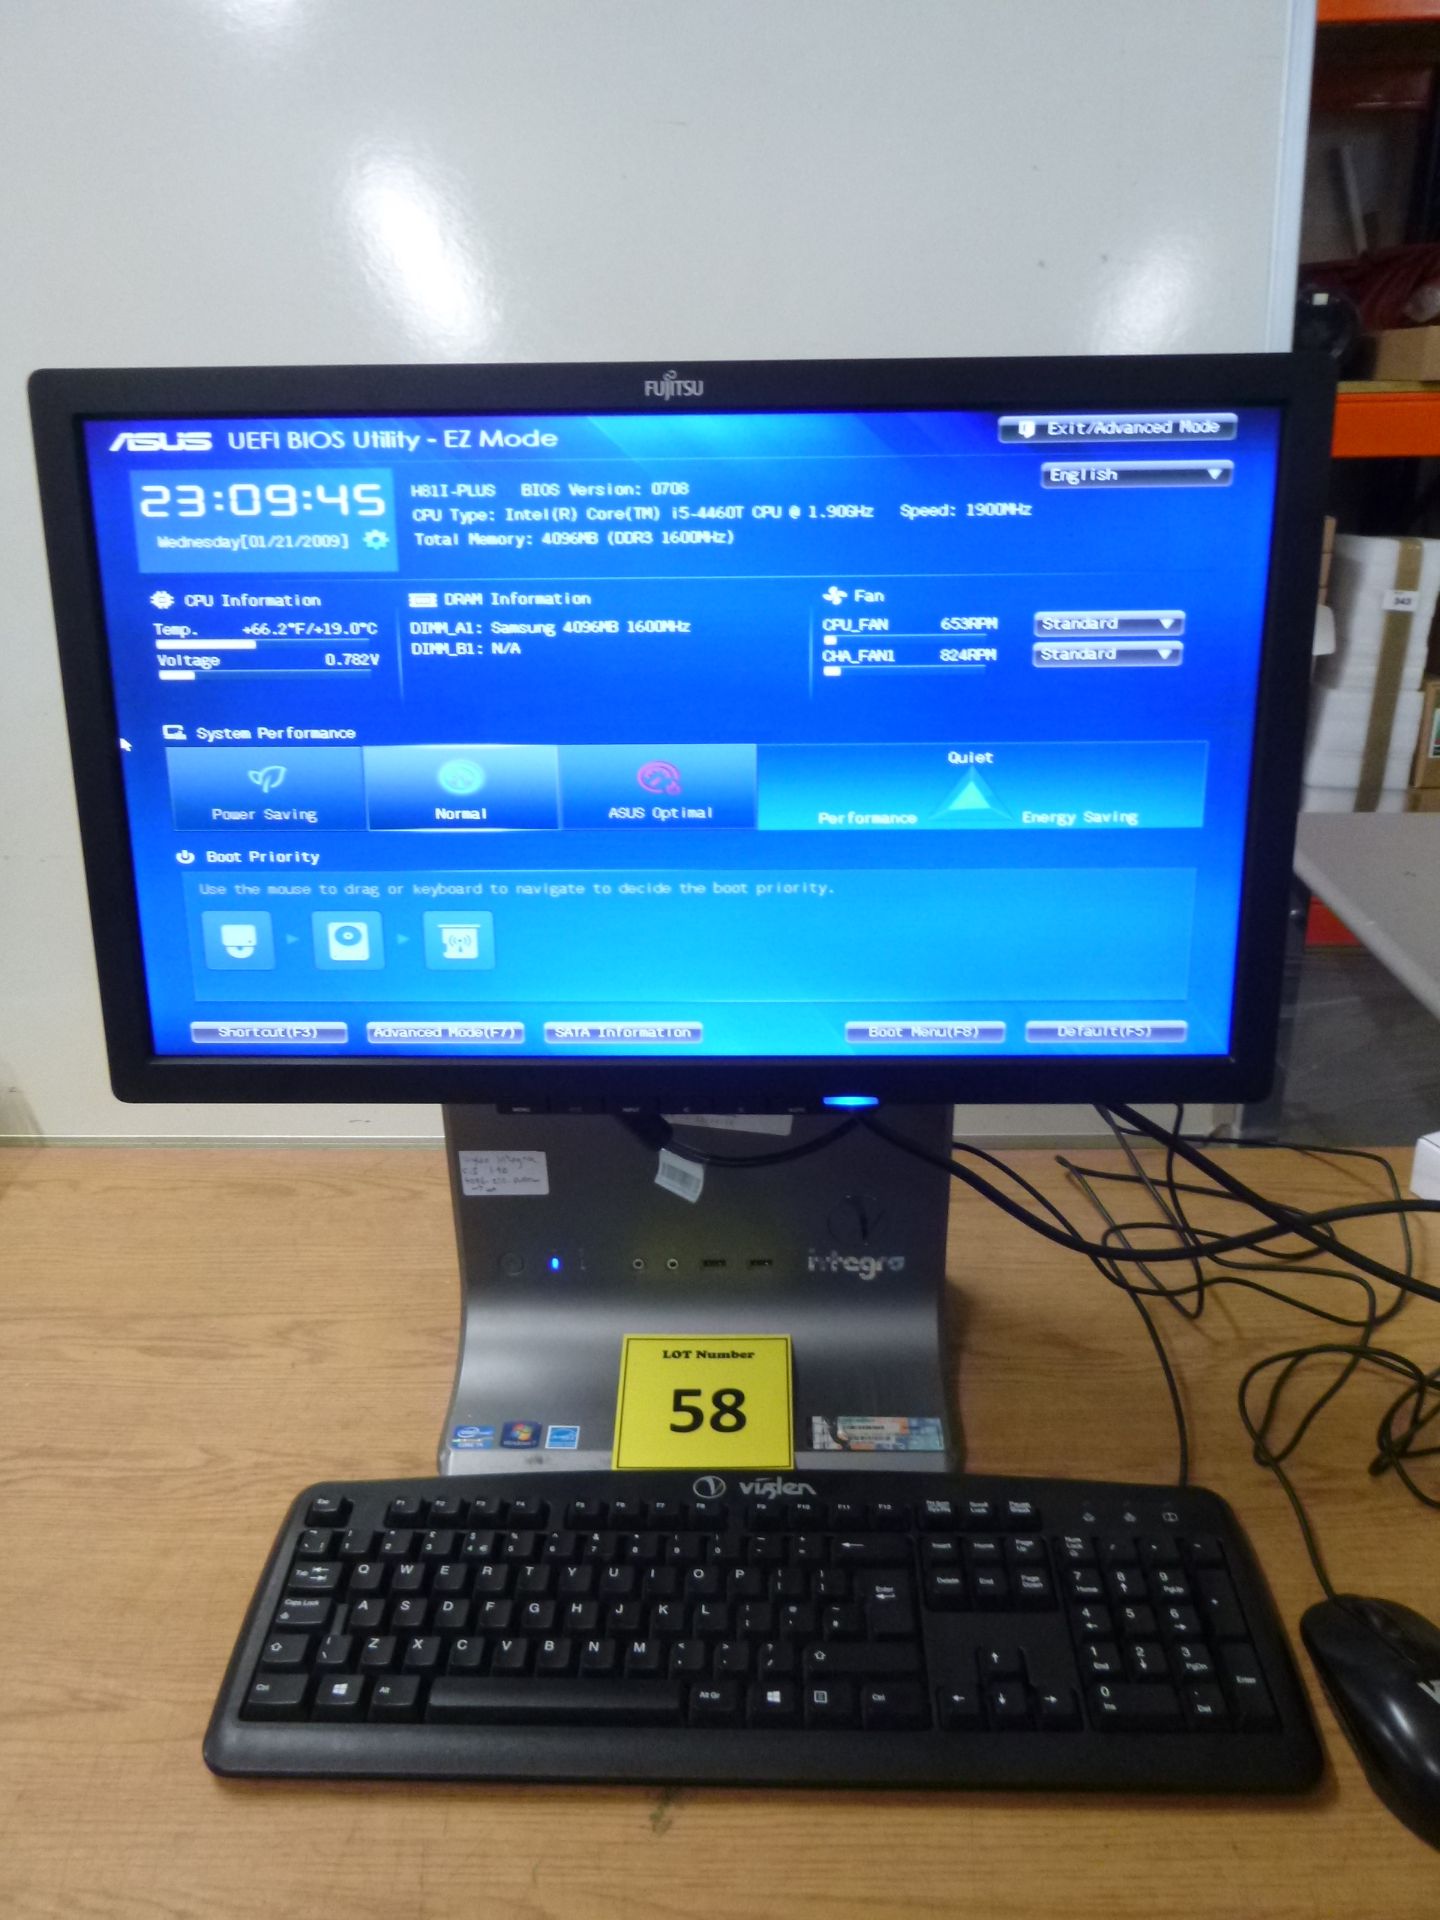 VIGLEN INTEGRA ALL IN ONE SYSTEM. CORE i5 4460T @ 1.9GHZ, 4GB RAM, 250GB HDD, DVDRW WITH 22" TFT